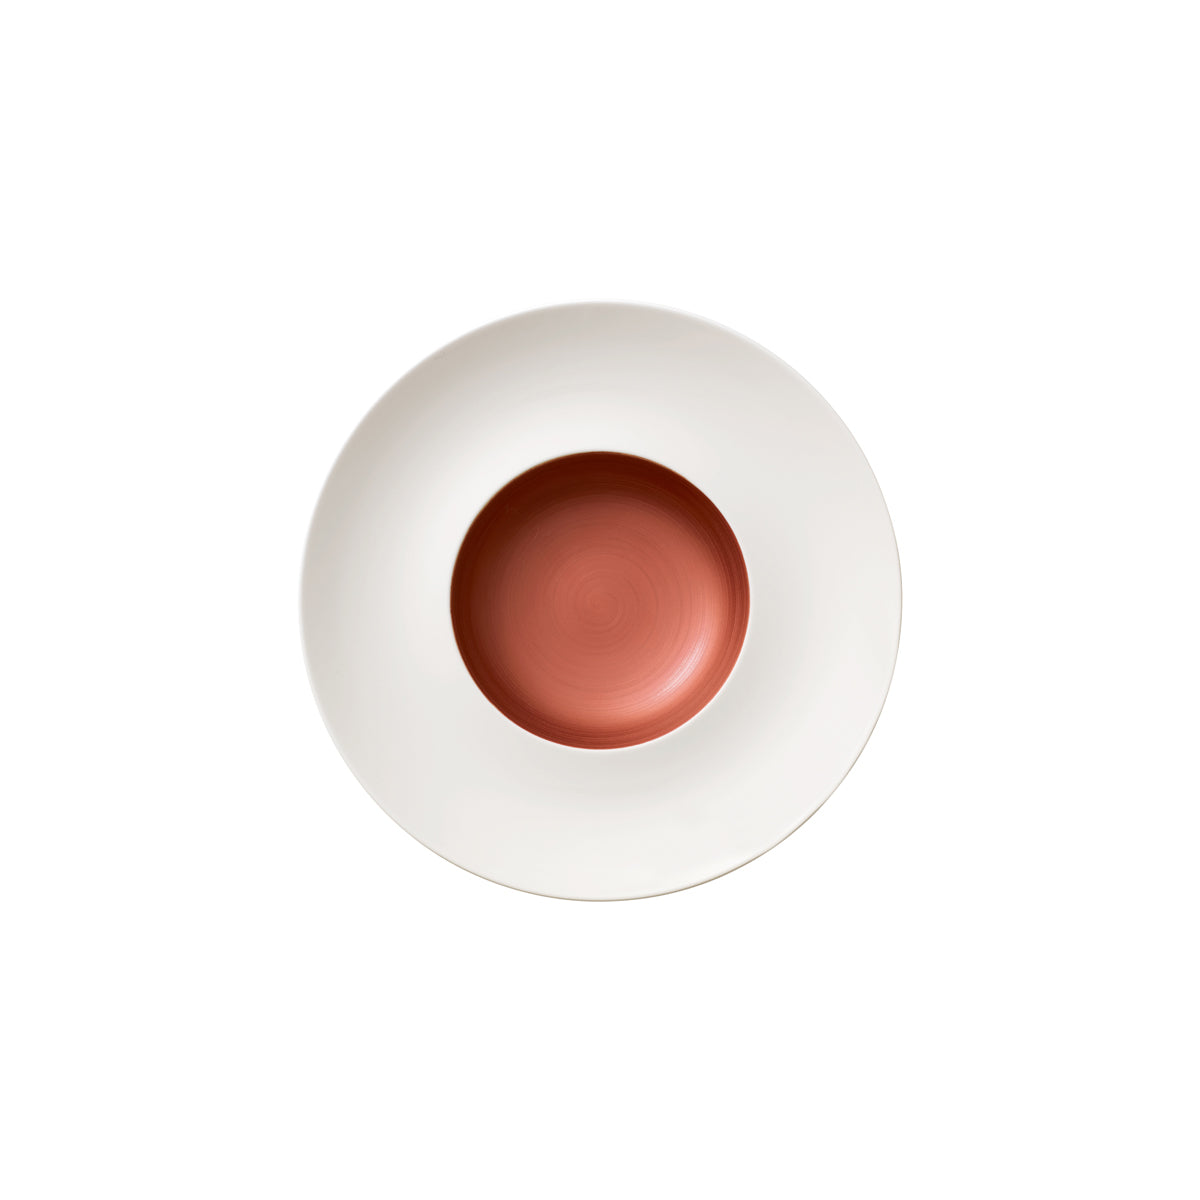 VB16-4070-2705 Villeroy And Boch Villeroy And Boch Copper Glow Deep Plate Inside 290mm / 140mm Tomkin Australia Hospitality Supplies